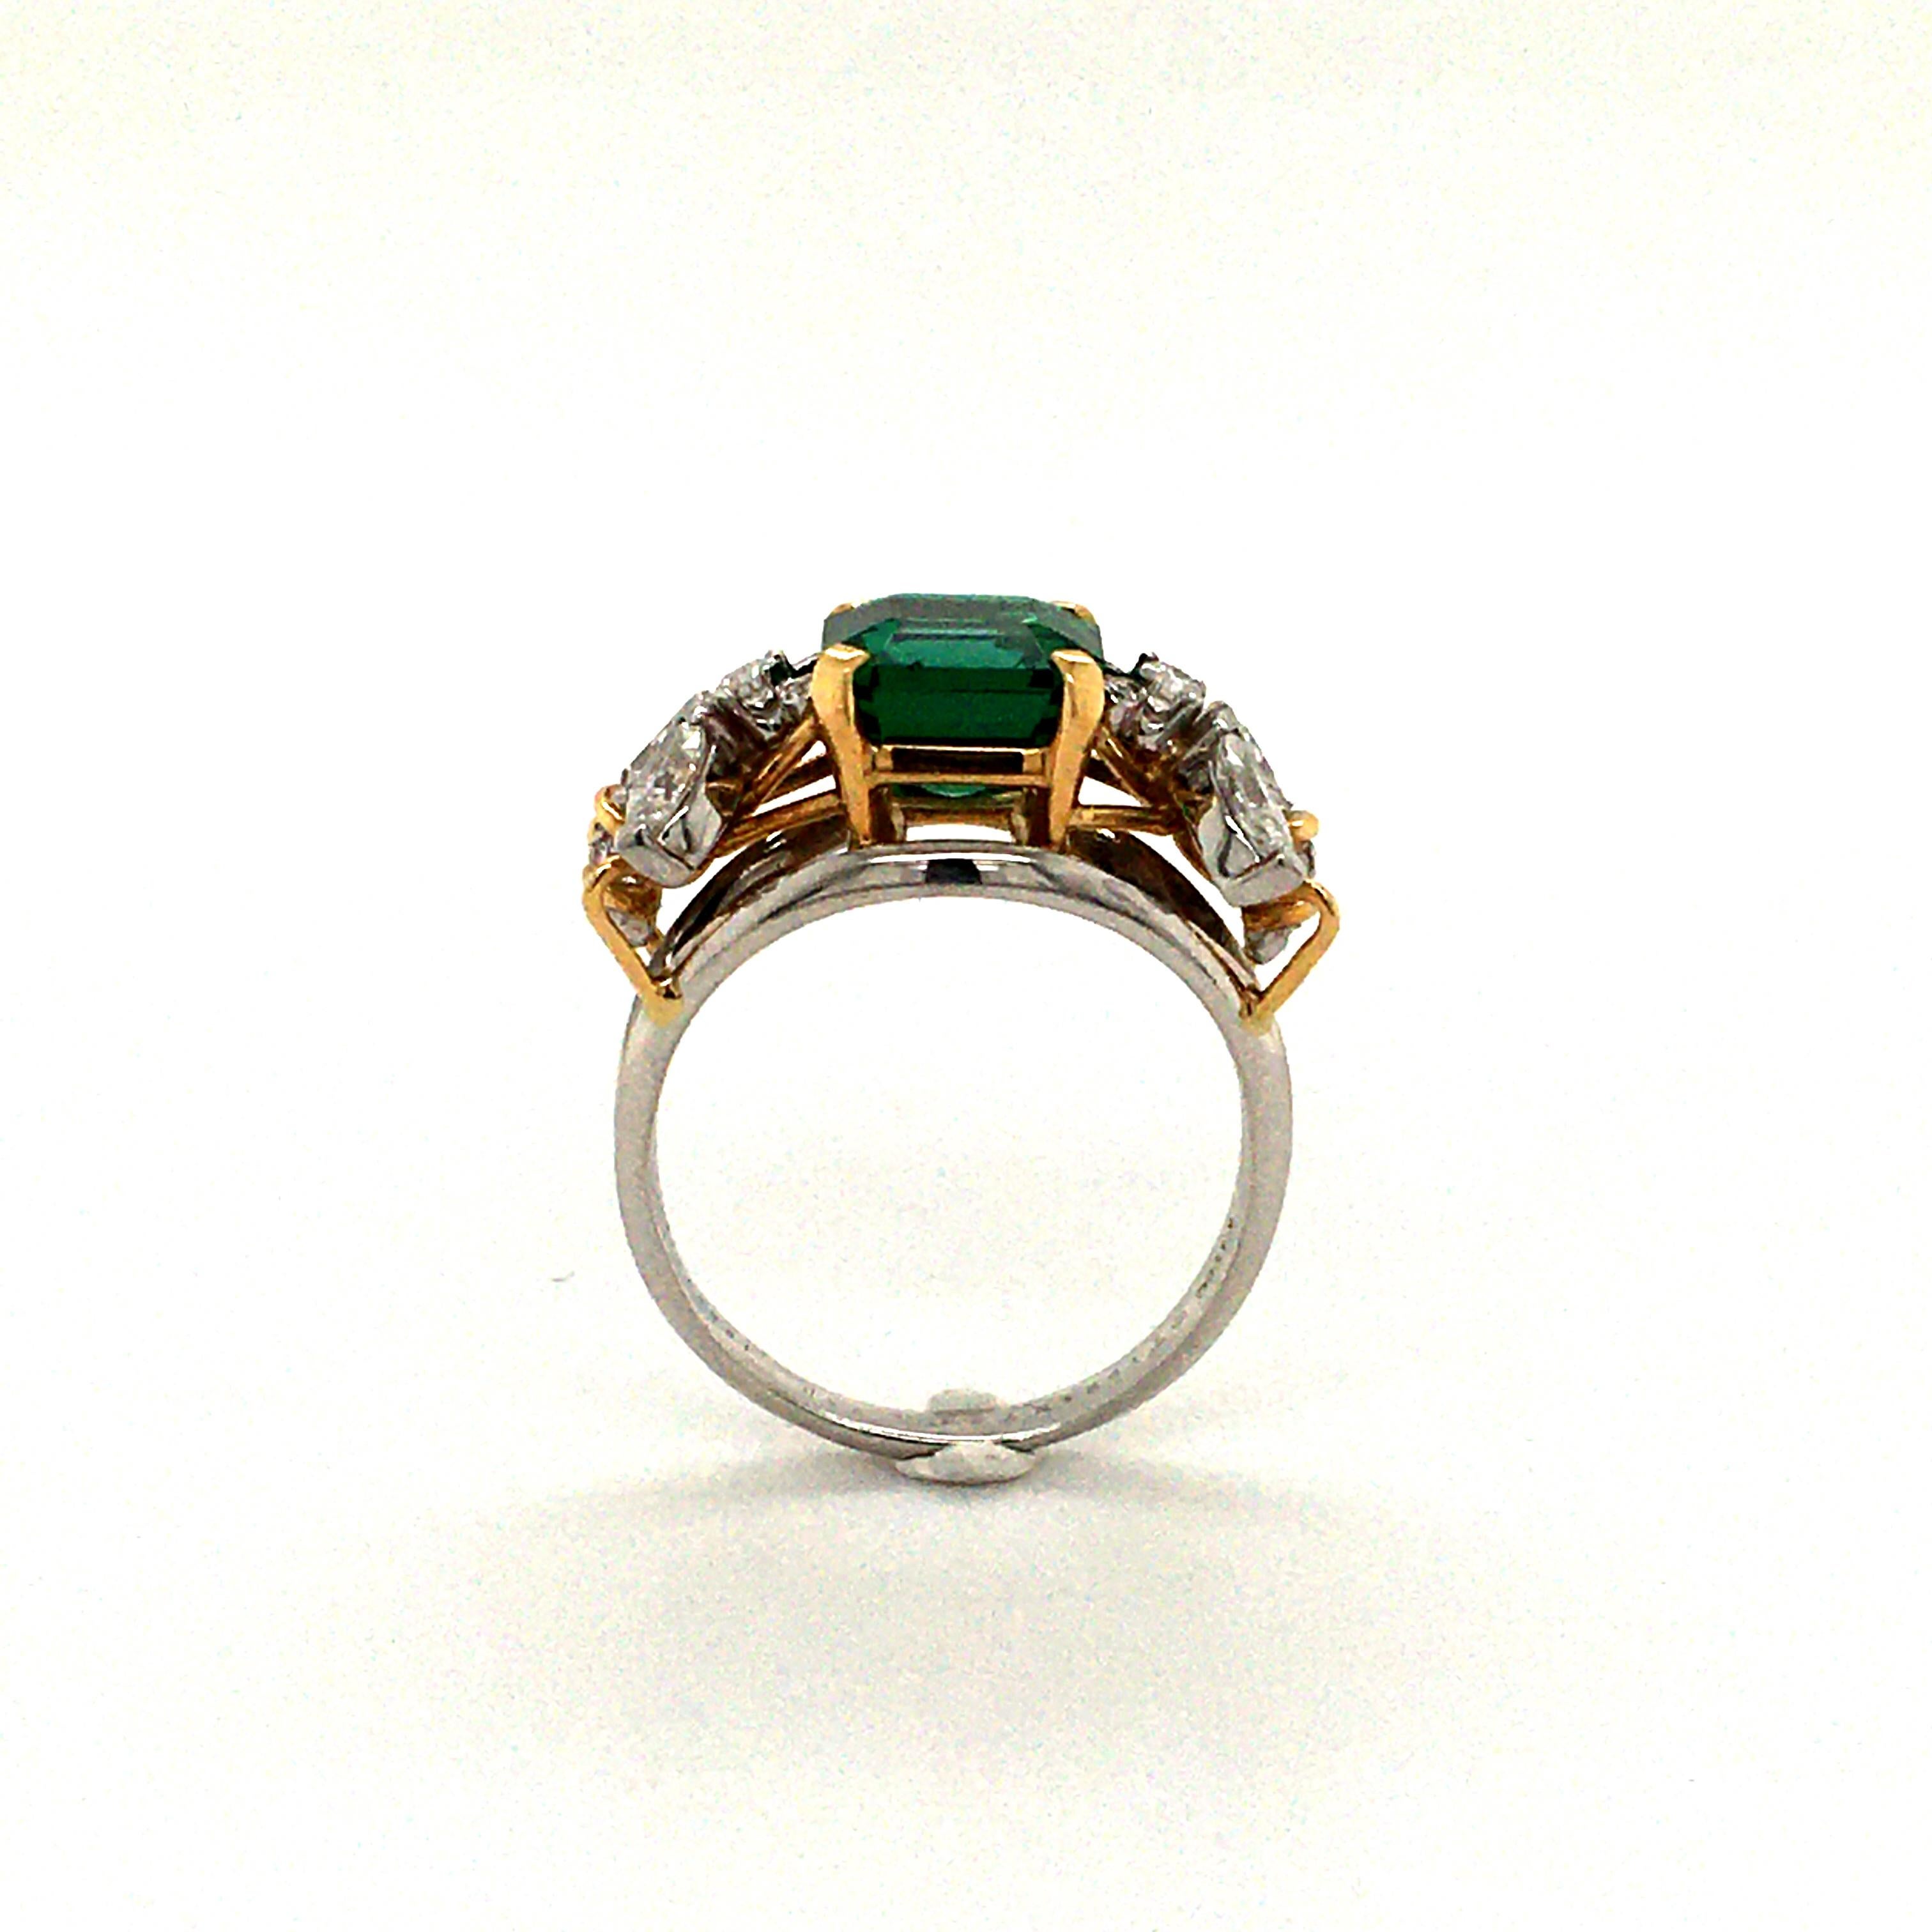 Emerald and Diamond 'Two Bees' Ring, by Jean Schlumberger for Tiffany & Co. For Sale 2